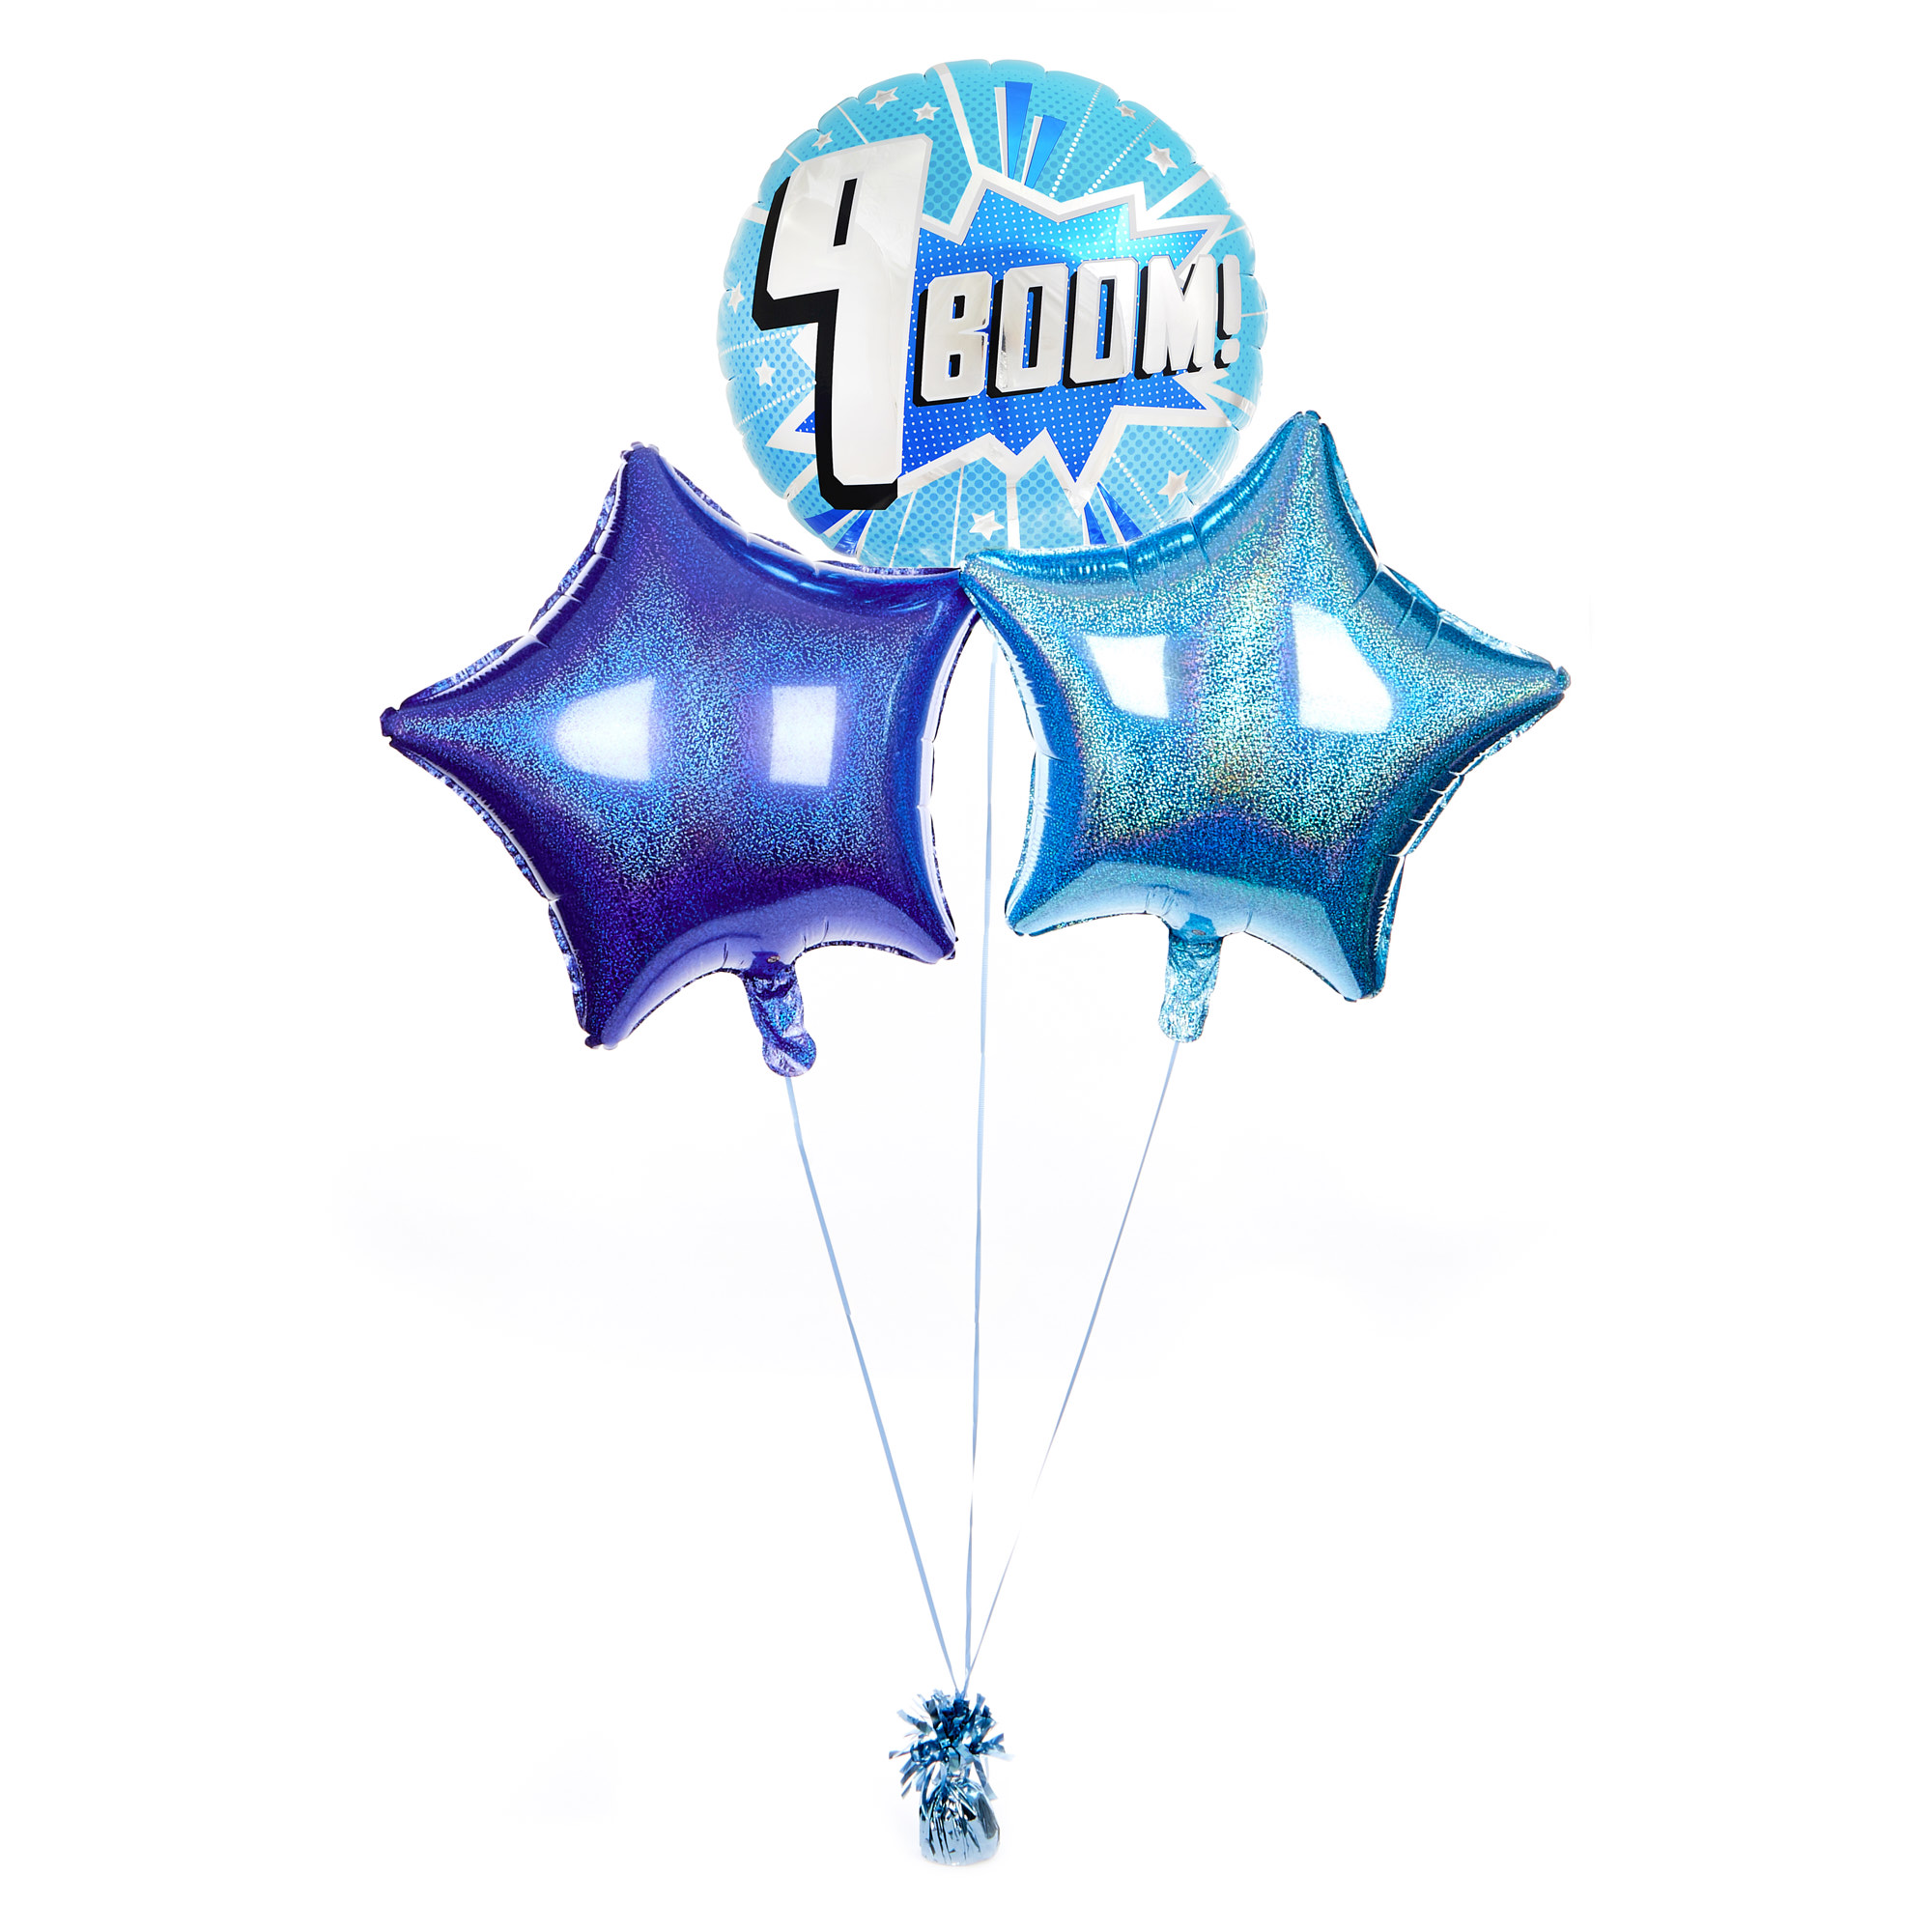 Boom! 9th Birthday Balloon Bouquet - DELIVERED INFLATED!